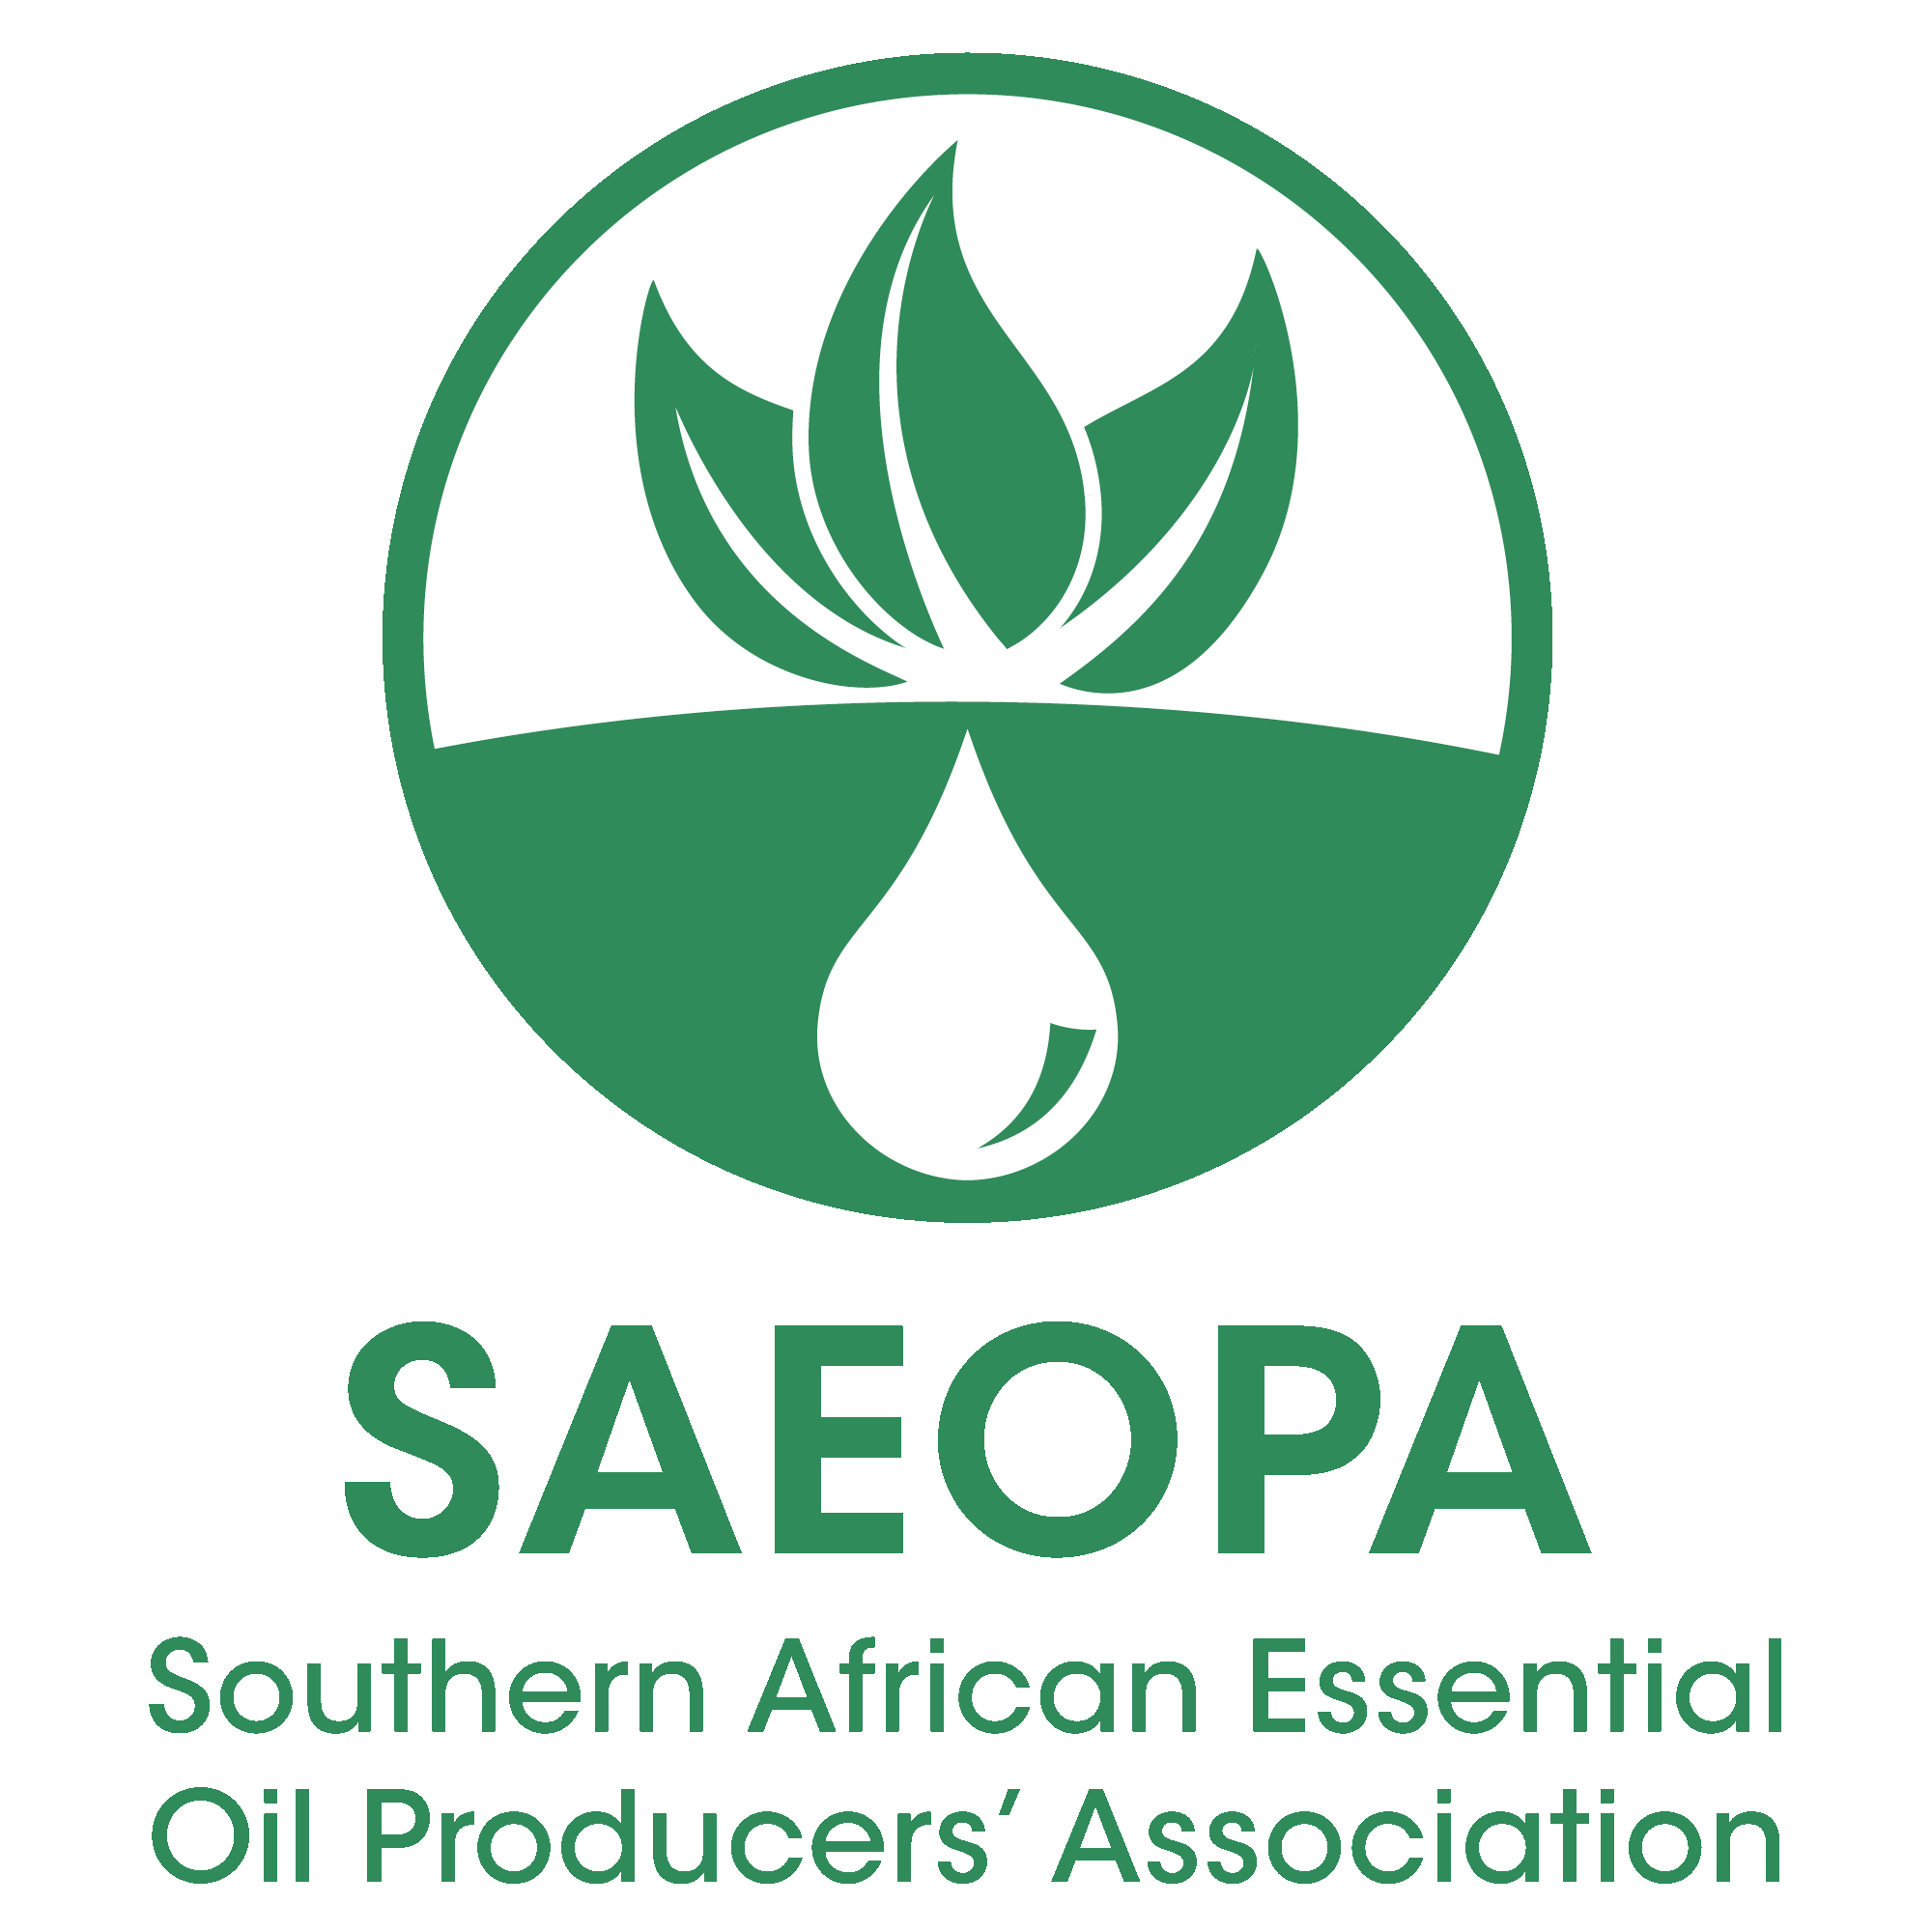 Proud Member of the Southern African Essential Oil Producers' Association